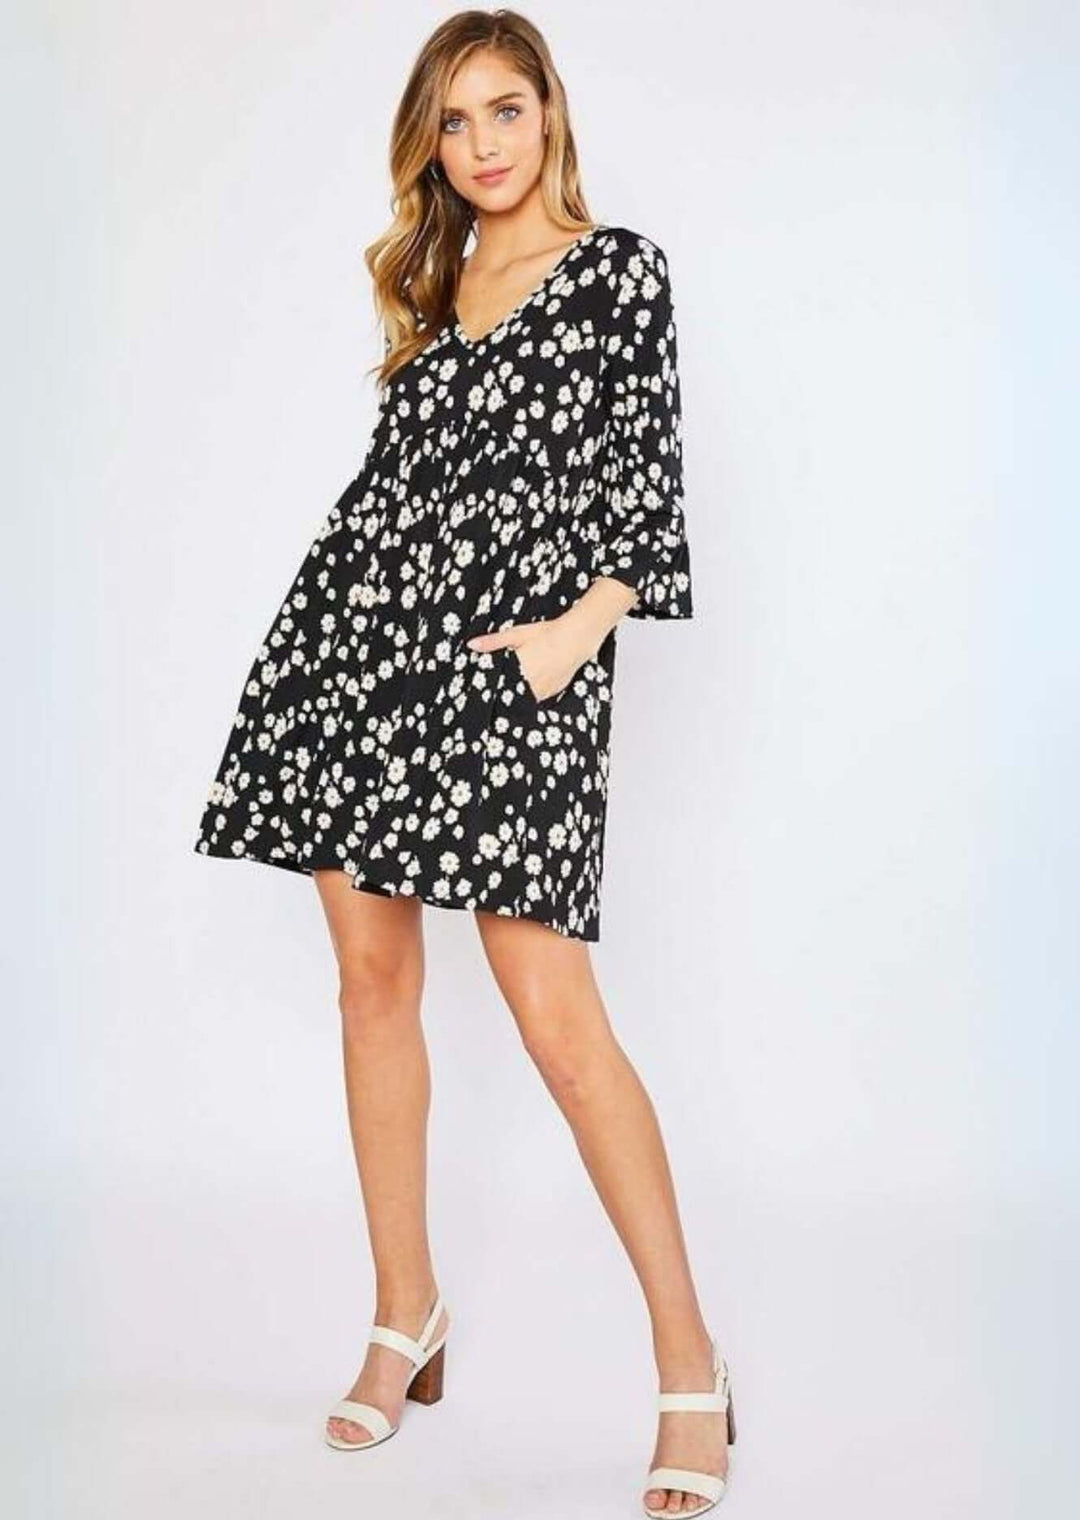 Women's Jersey Stretch Black Daisy Print V-Neck Baby Doll Cut Mini Dress | Made in USA | Classy Cozy Cool Women's Made in America Boutique